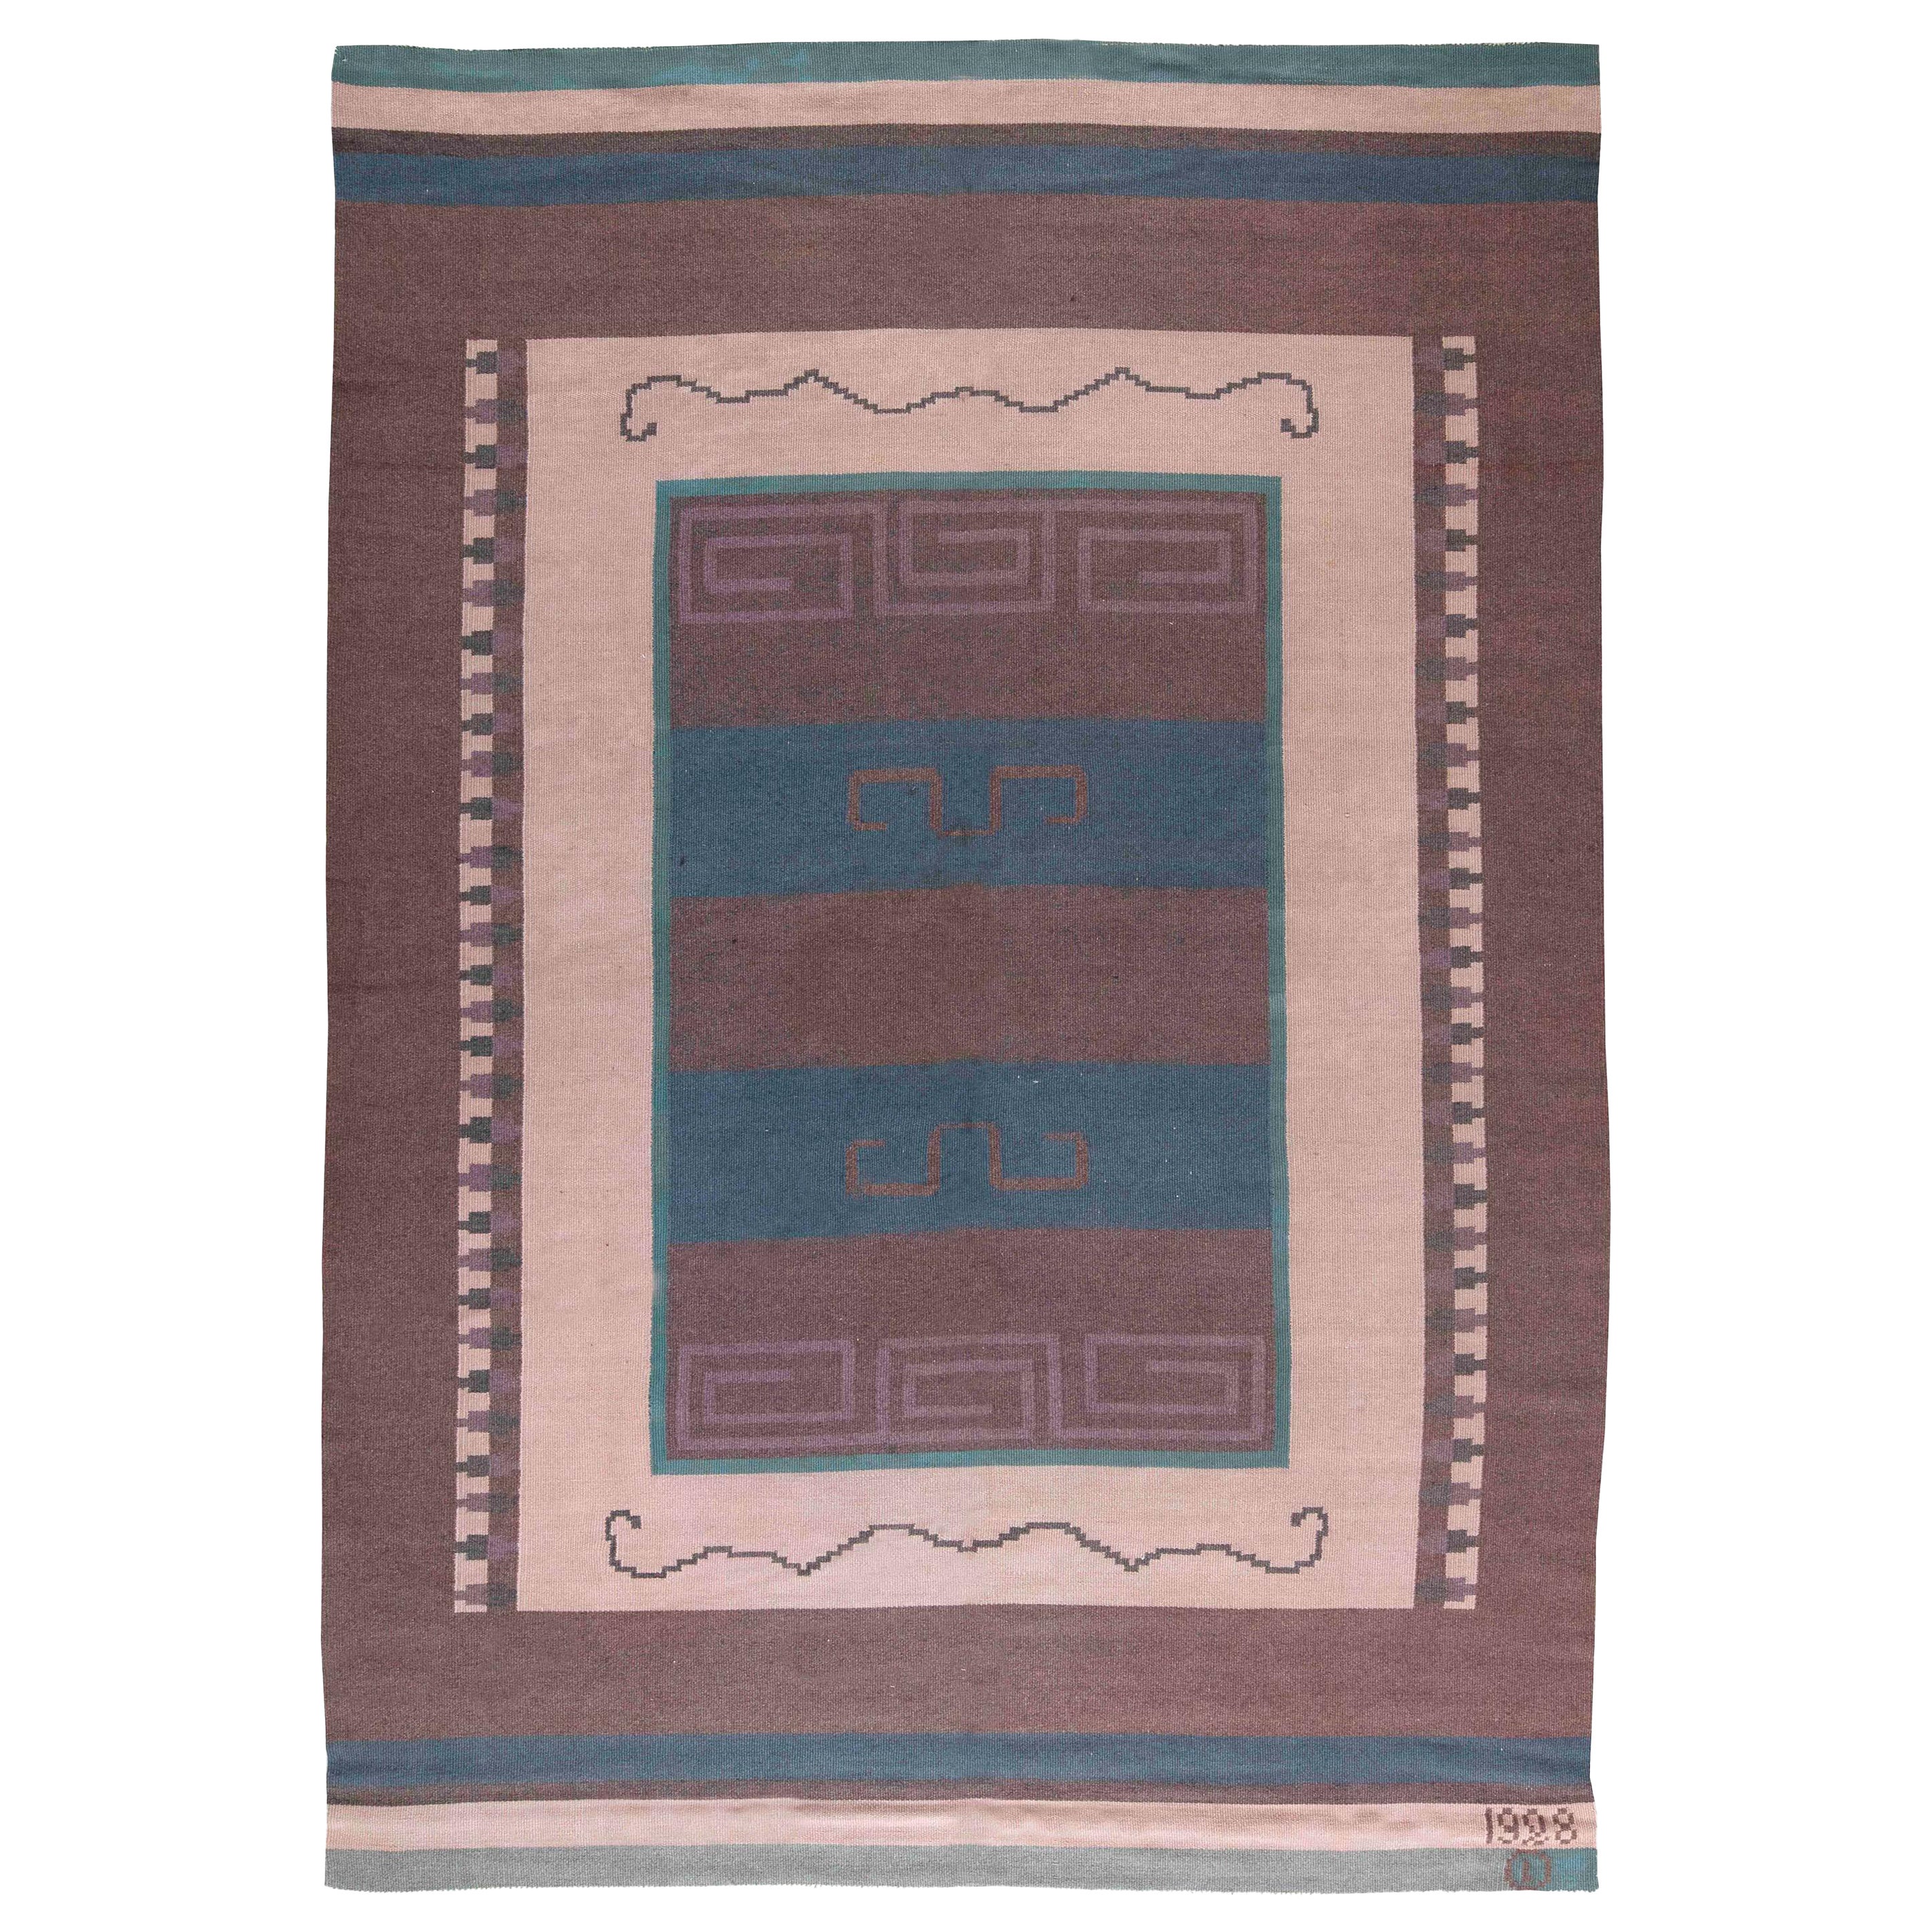 Vintage Scandinavian Flat-Weave Wool Rug Woven Initials & Date to Edge 'Io 1928' For Sale